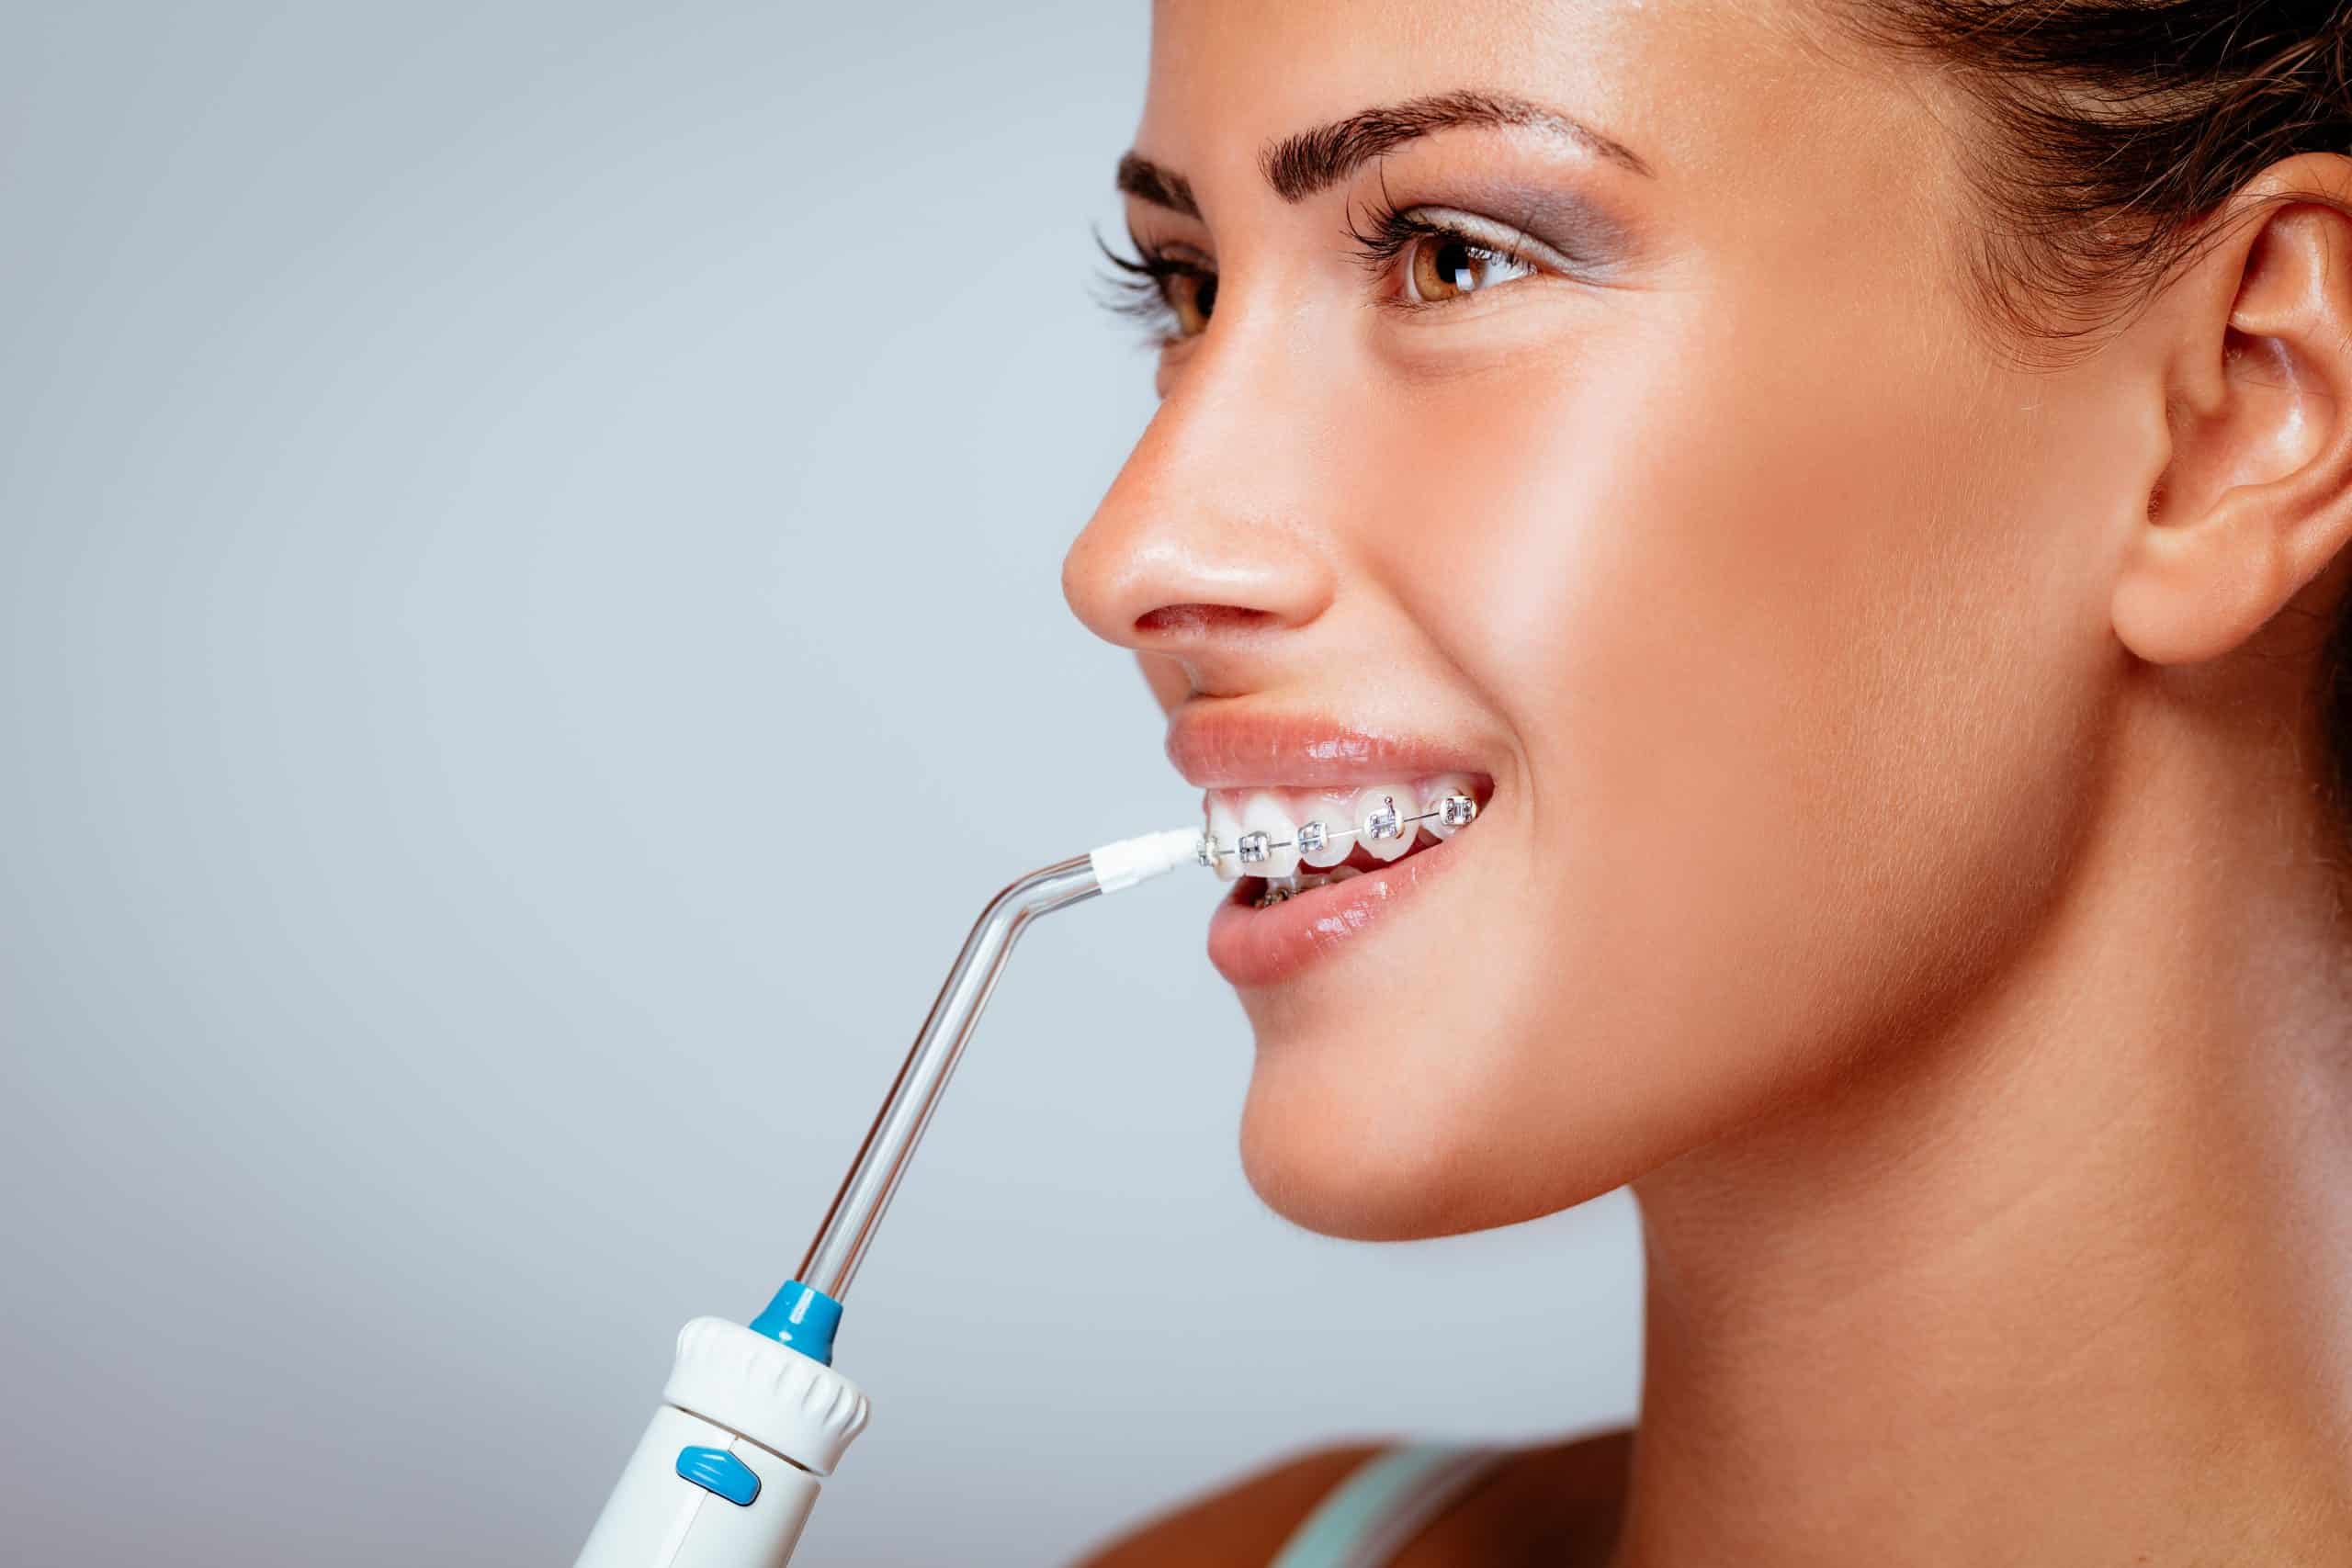 Flossing helps remove food particles that get stuck between your teeth